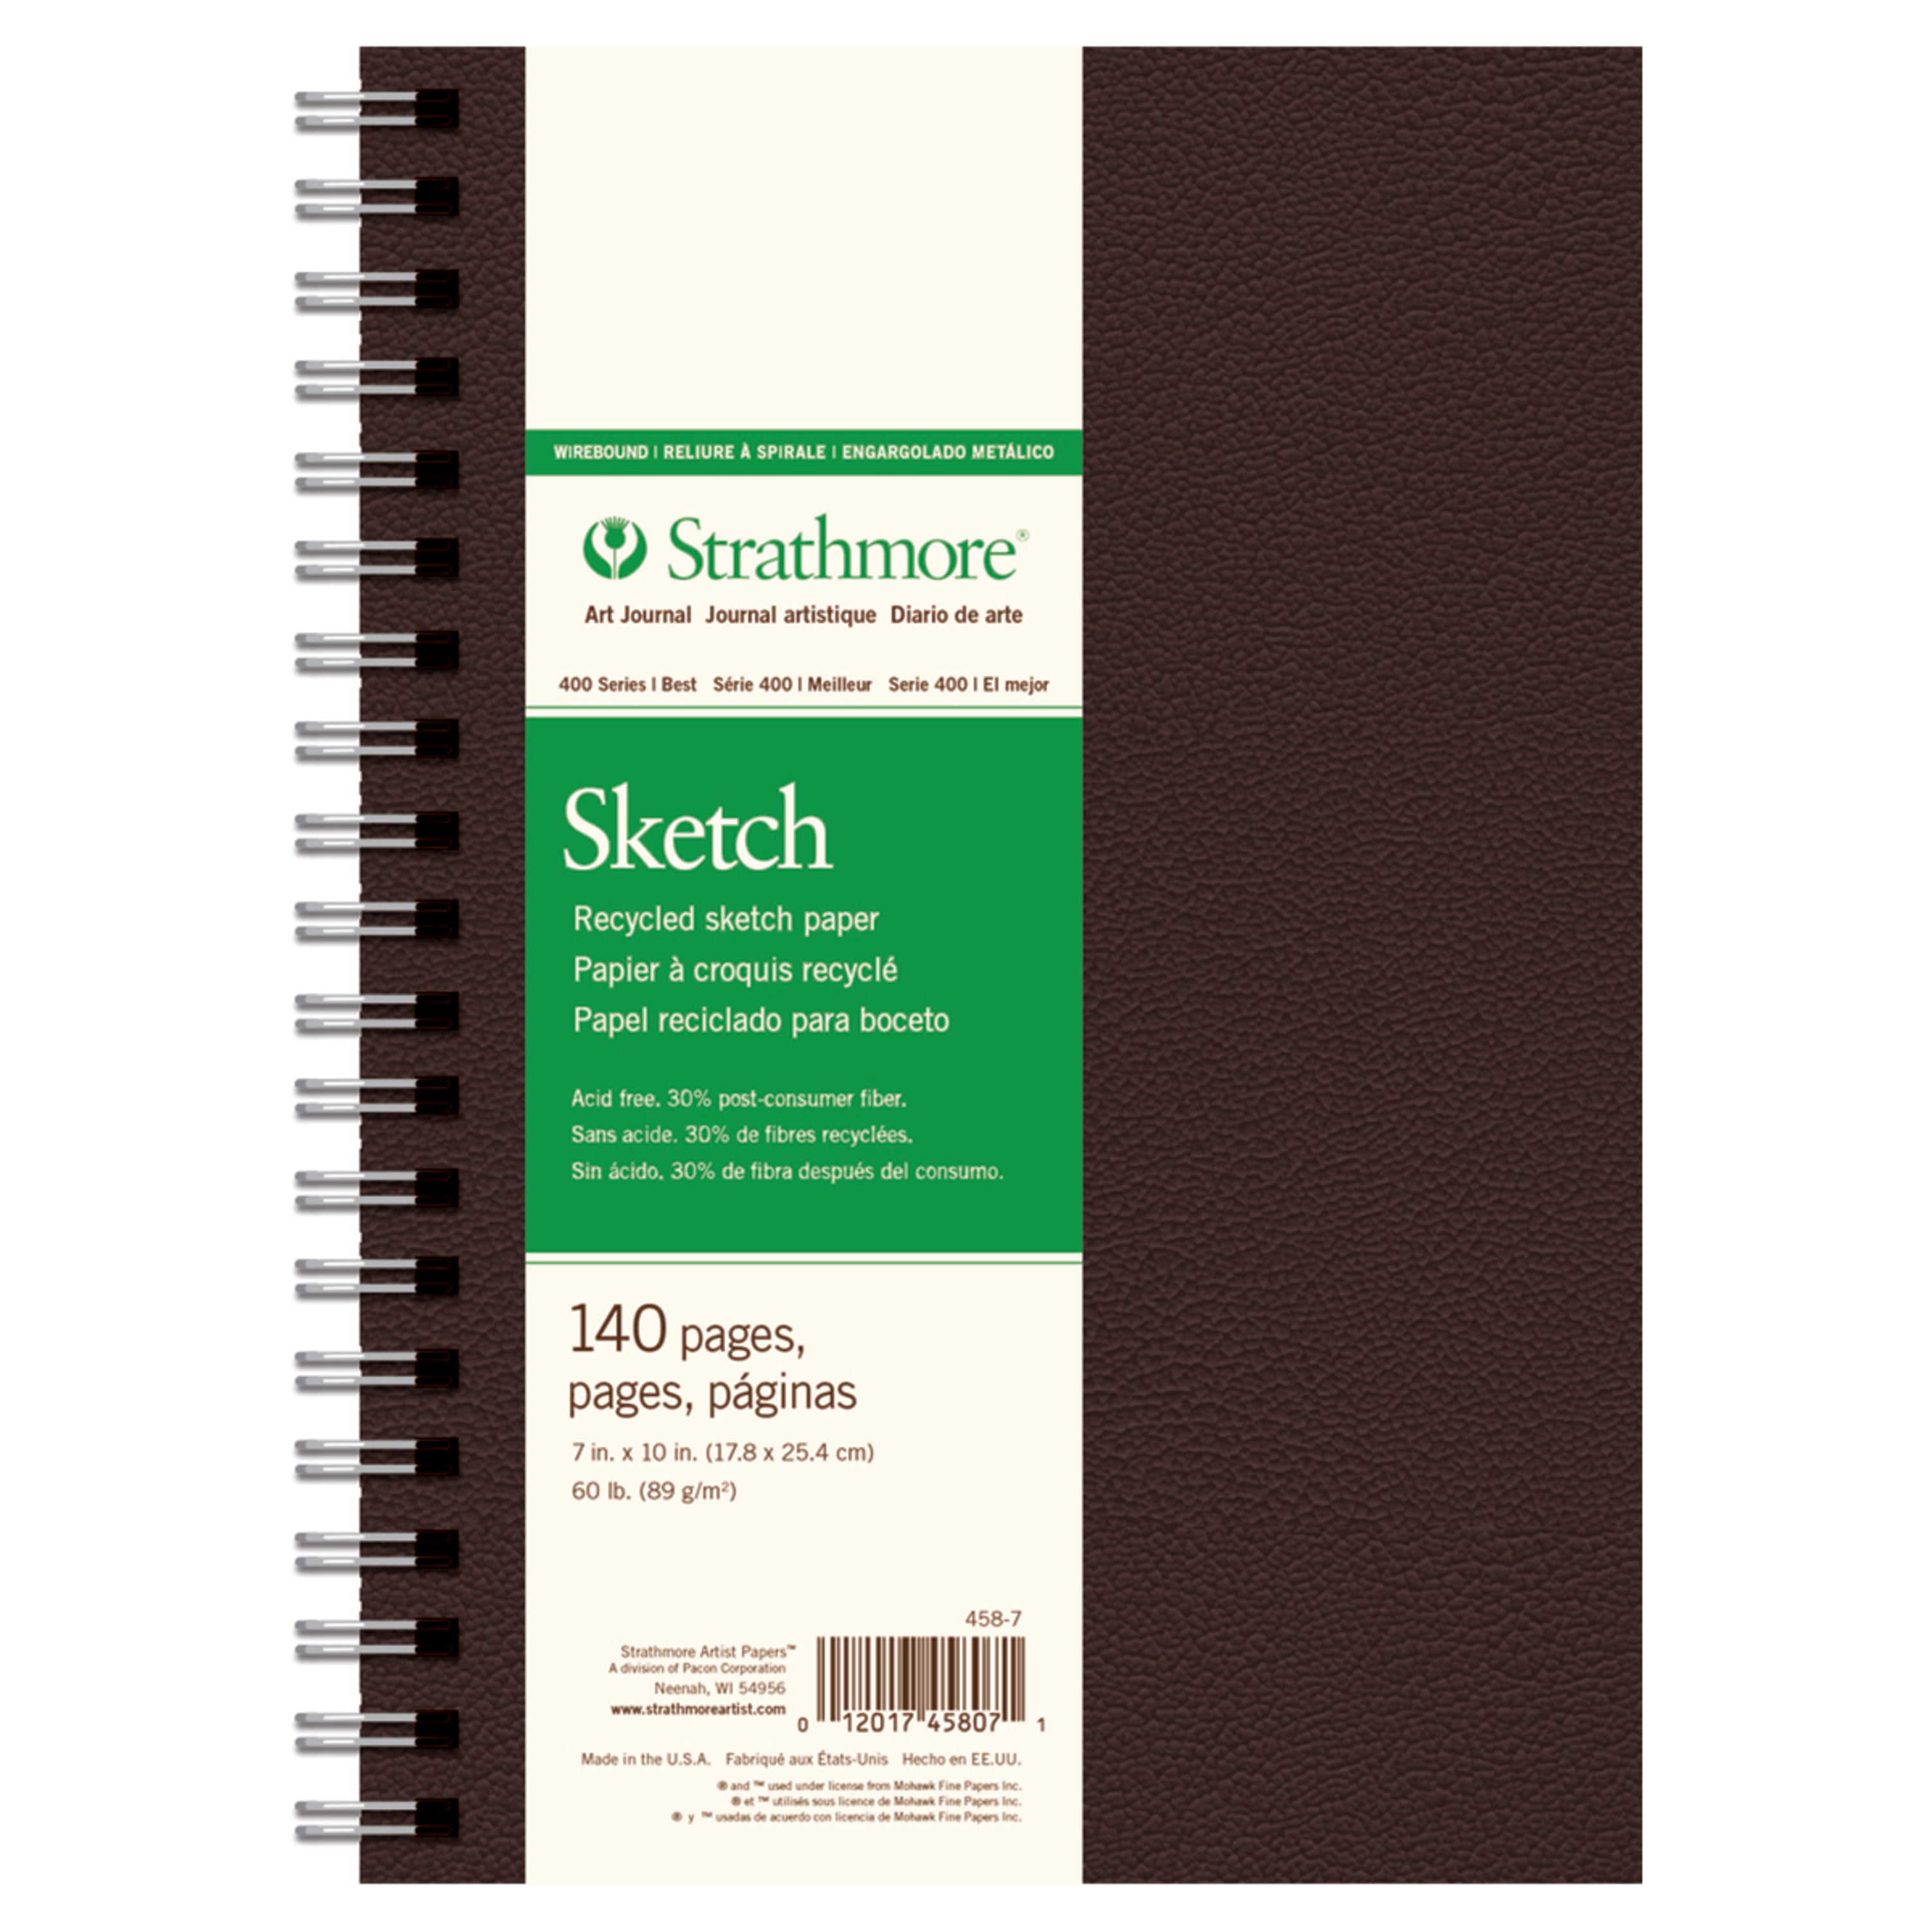 American Strathmore Drawing Notebooks Warm Brown/cold Gray, Sketch Color  Lead,portable Notebook,sketchbook,sketch Art Supplies - Sketchbooks -  AliExpress